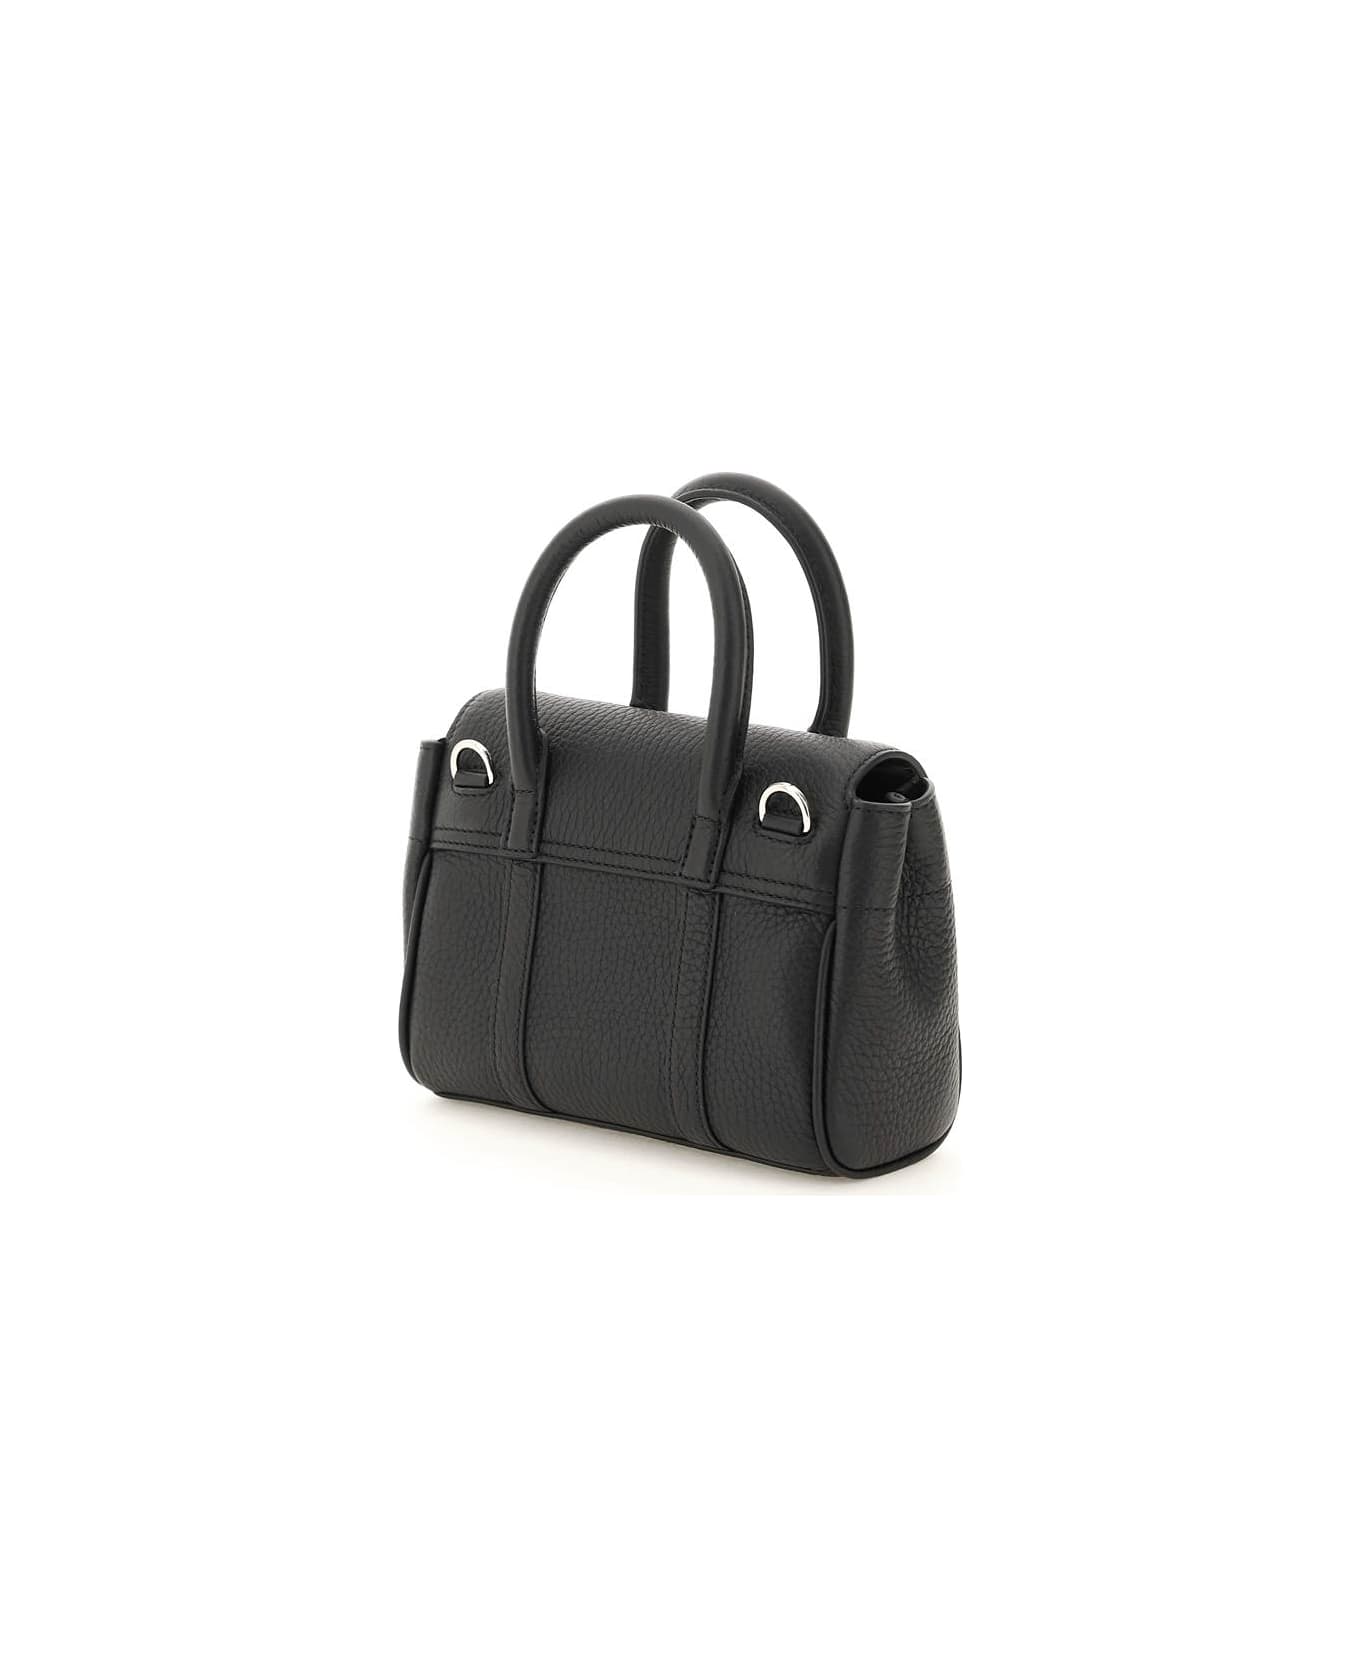 Mulberry Bayswater Mini Bag - A100